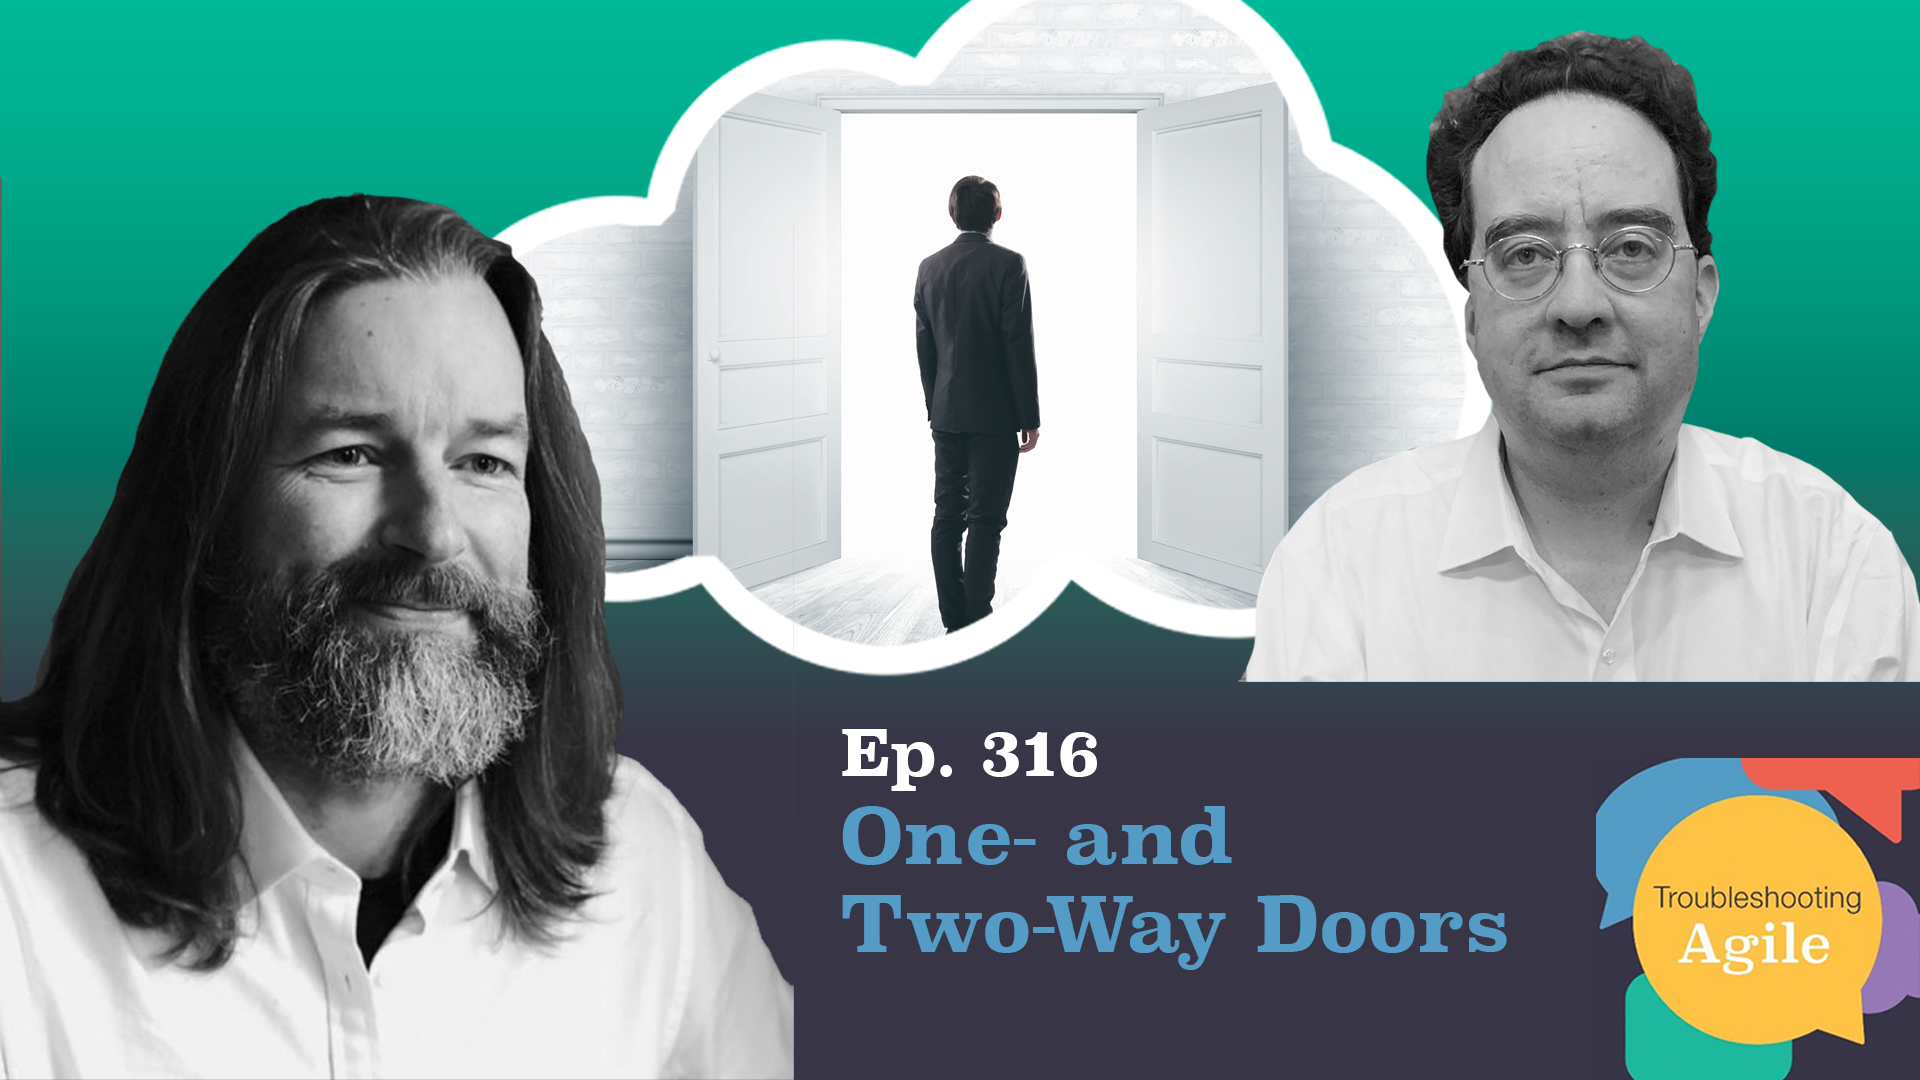 One- and Two-Way Doors